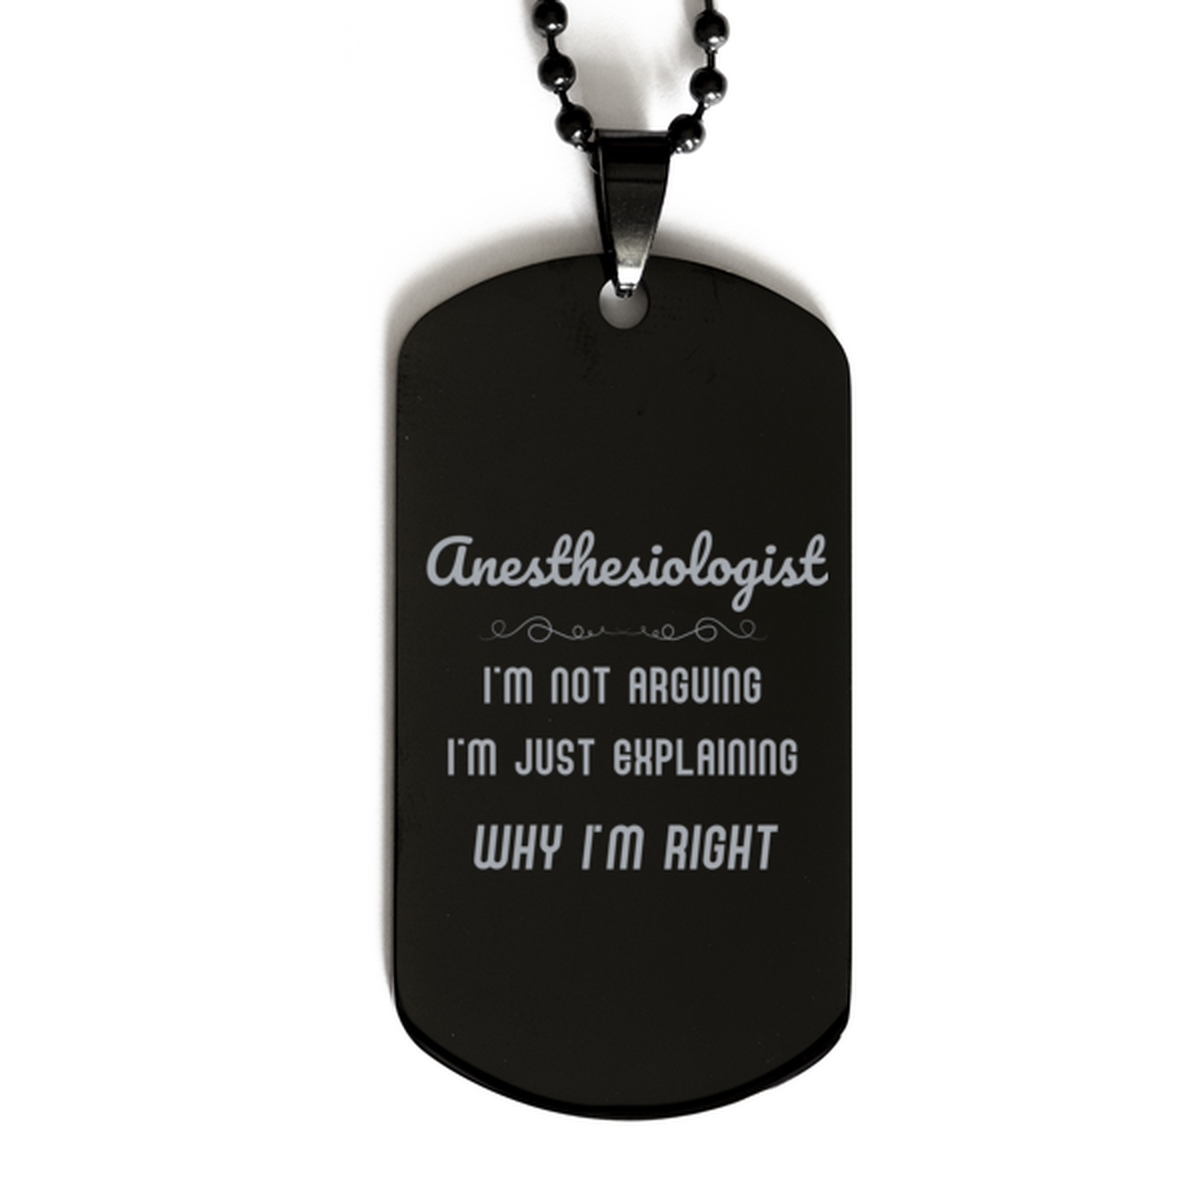 Anesthesiologist I'm not Arguing. I'm Just Explaining Why I'm RIGHT Black Dog Tag, Funny Saying Quote Anesthesiologist Gifts For Anesthesiologist Graduation Birthday Christmas Gifts for Men Women Coworker